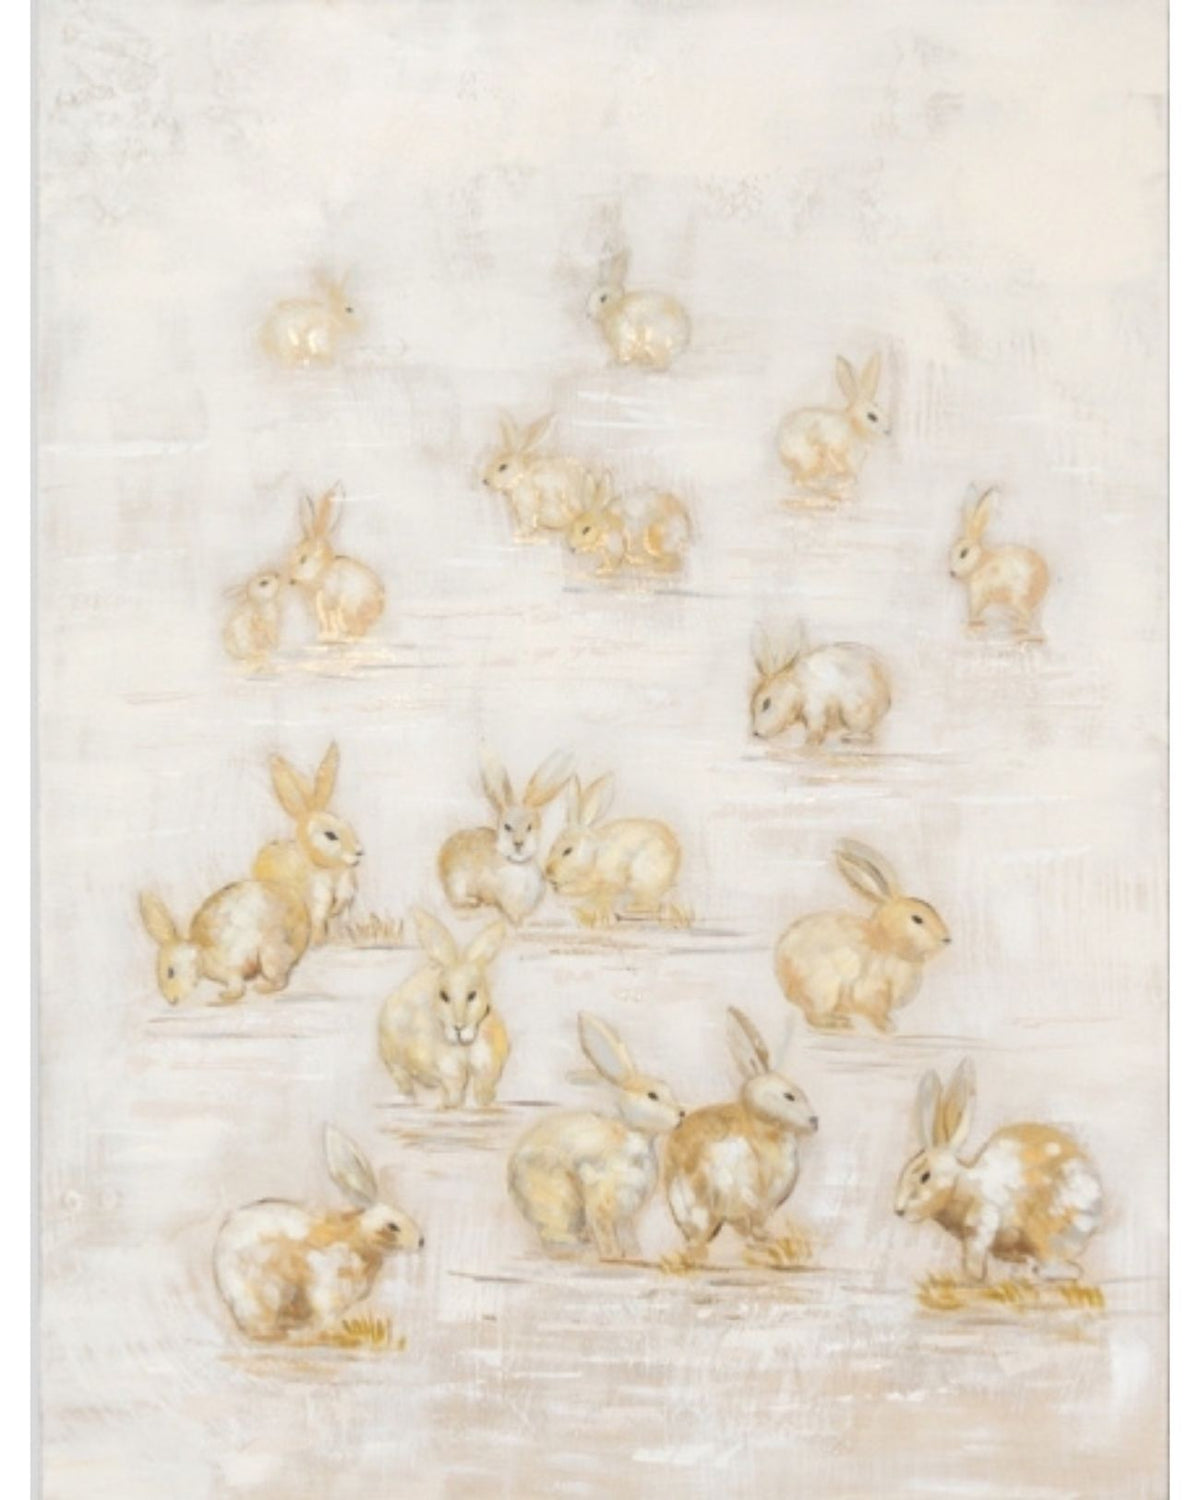 SHOWROOM DISPLAY  This gorgeous Summer Field Bunnies framed canvas has glimmers of gold throughout which makes it a joy for any kid's space. Kids will love to create stories around these bunnies which are hopping through an open field.  As a canvas it is light weight and easy to hang and comes ready with hanging system on the back - you only need to provide the wall hook.